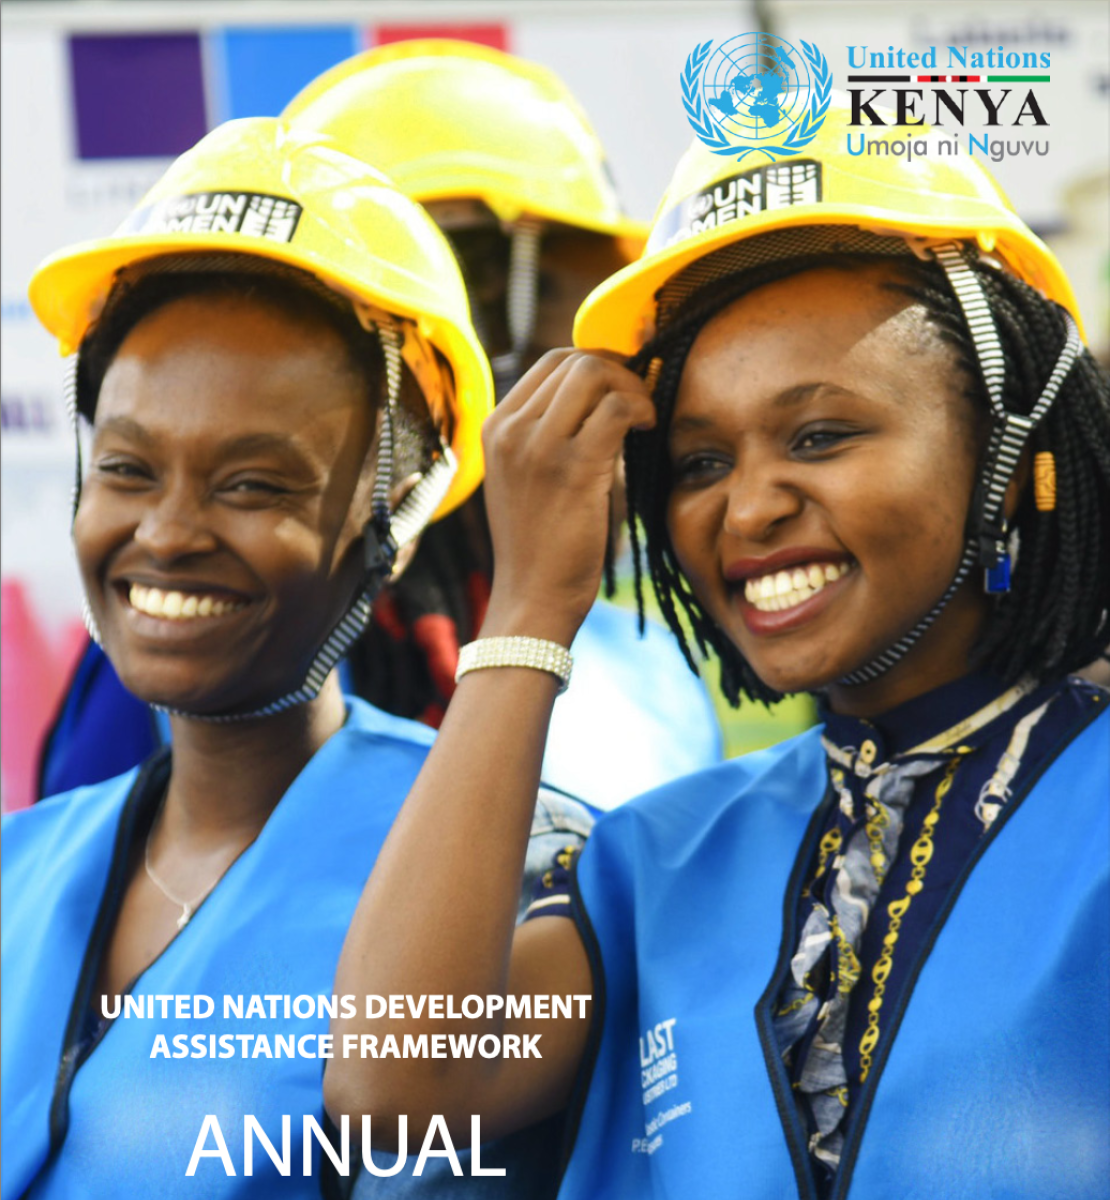 Publication cover featuring two young women wearing hard hats and safety vests smiling in the camera.